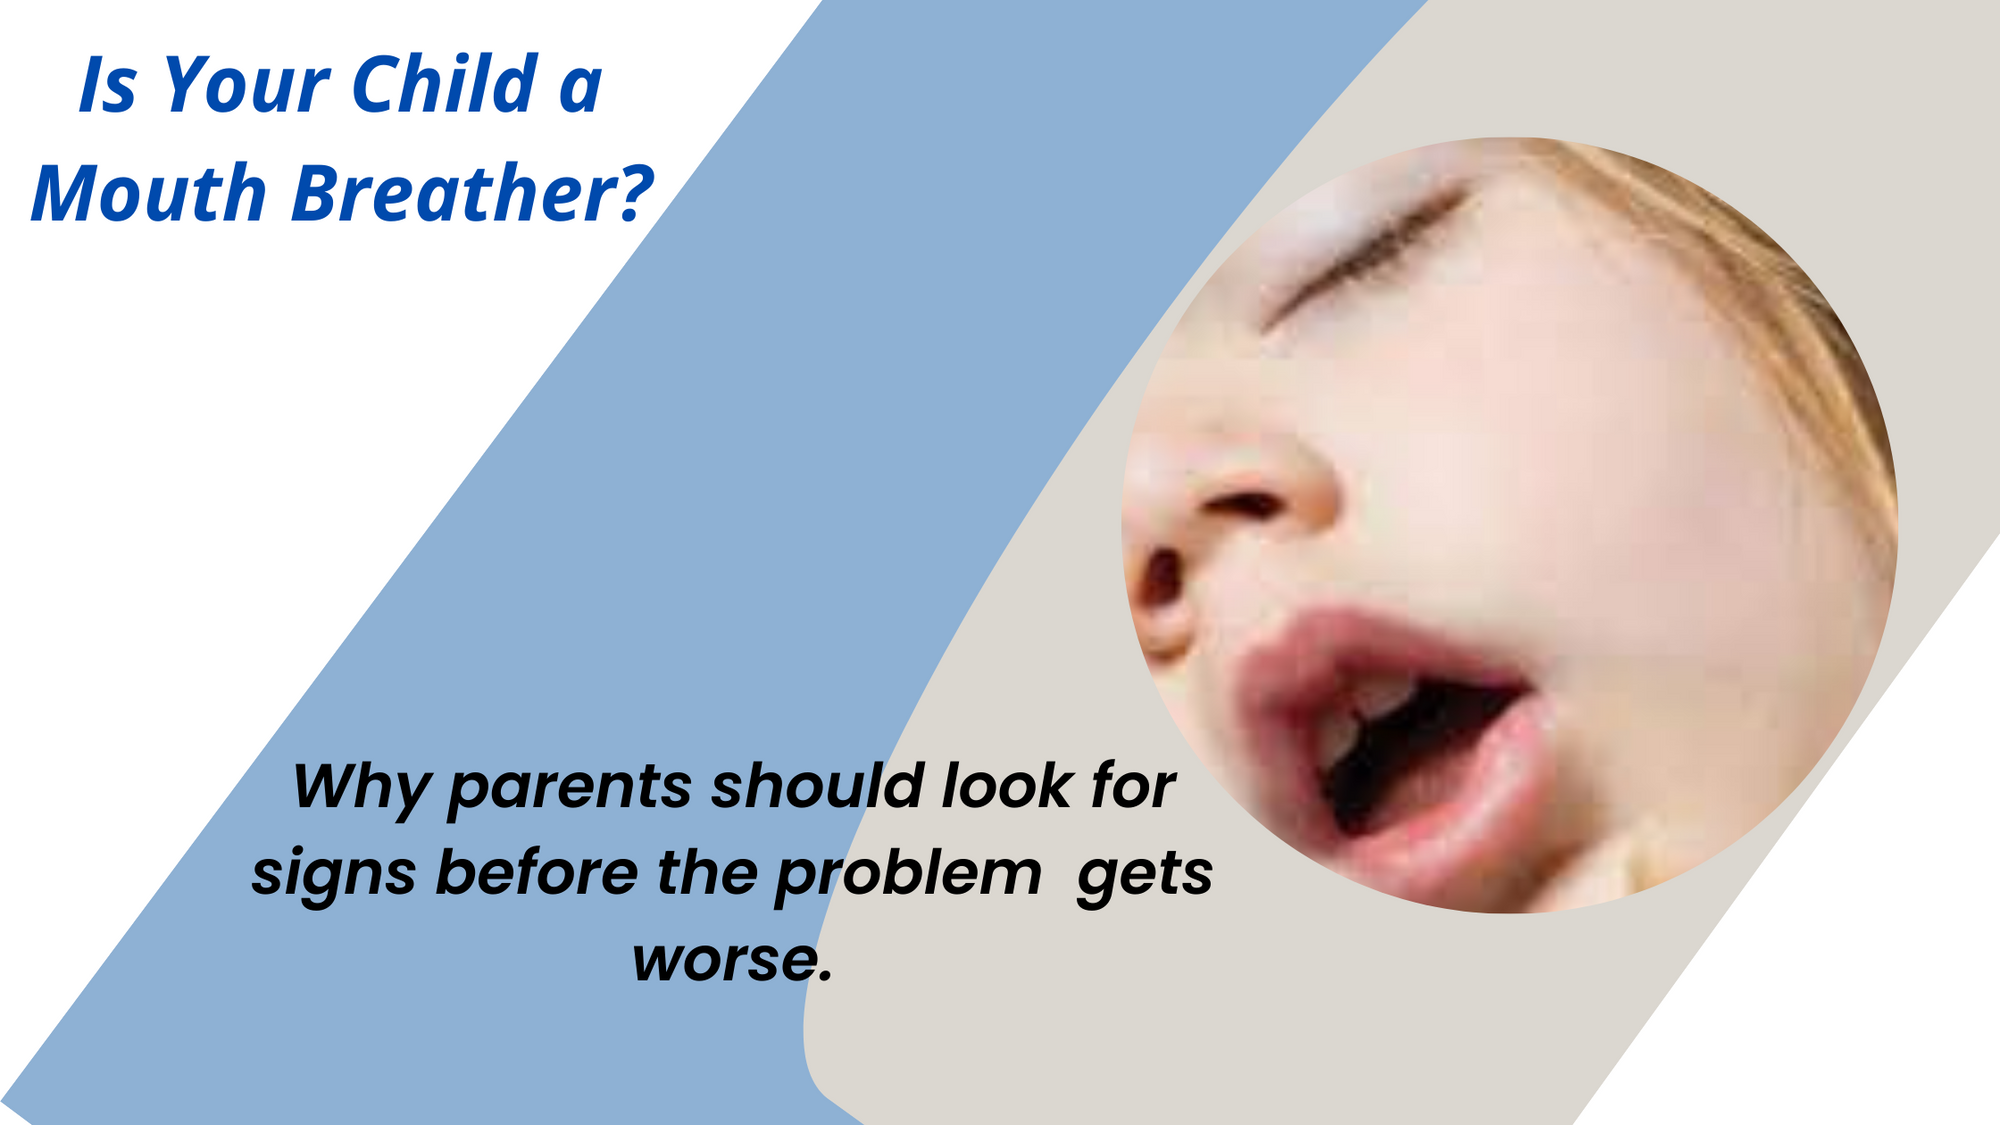 Is Your Child a Mouth Breather? Why parents should look for signs before the problem gets worse.